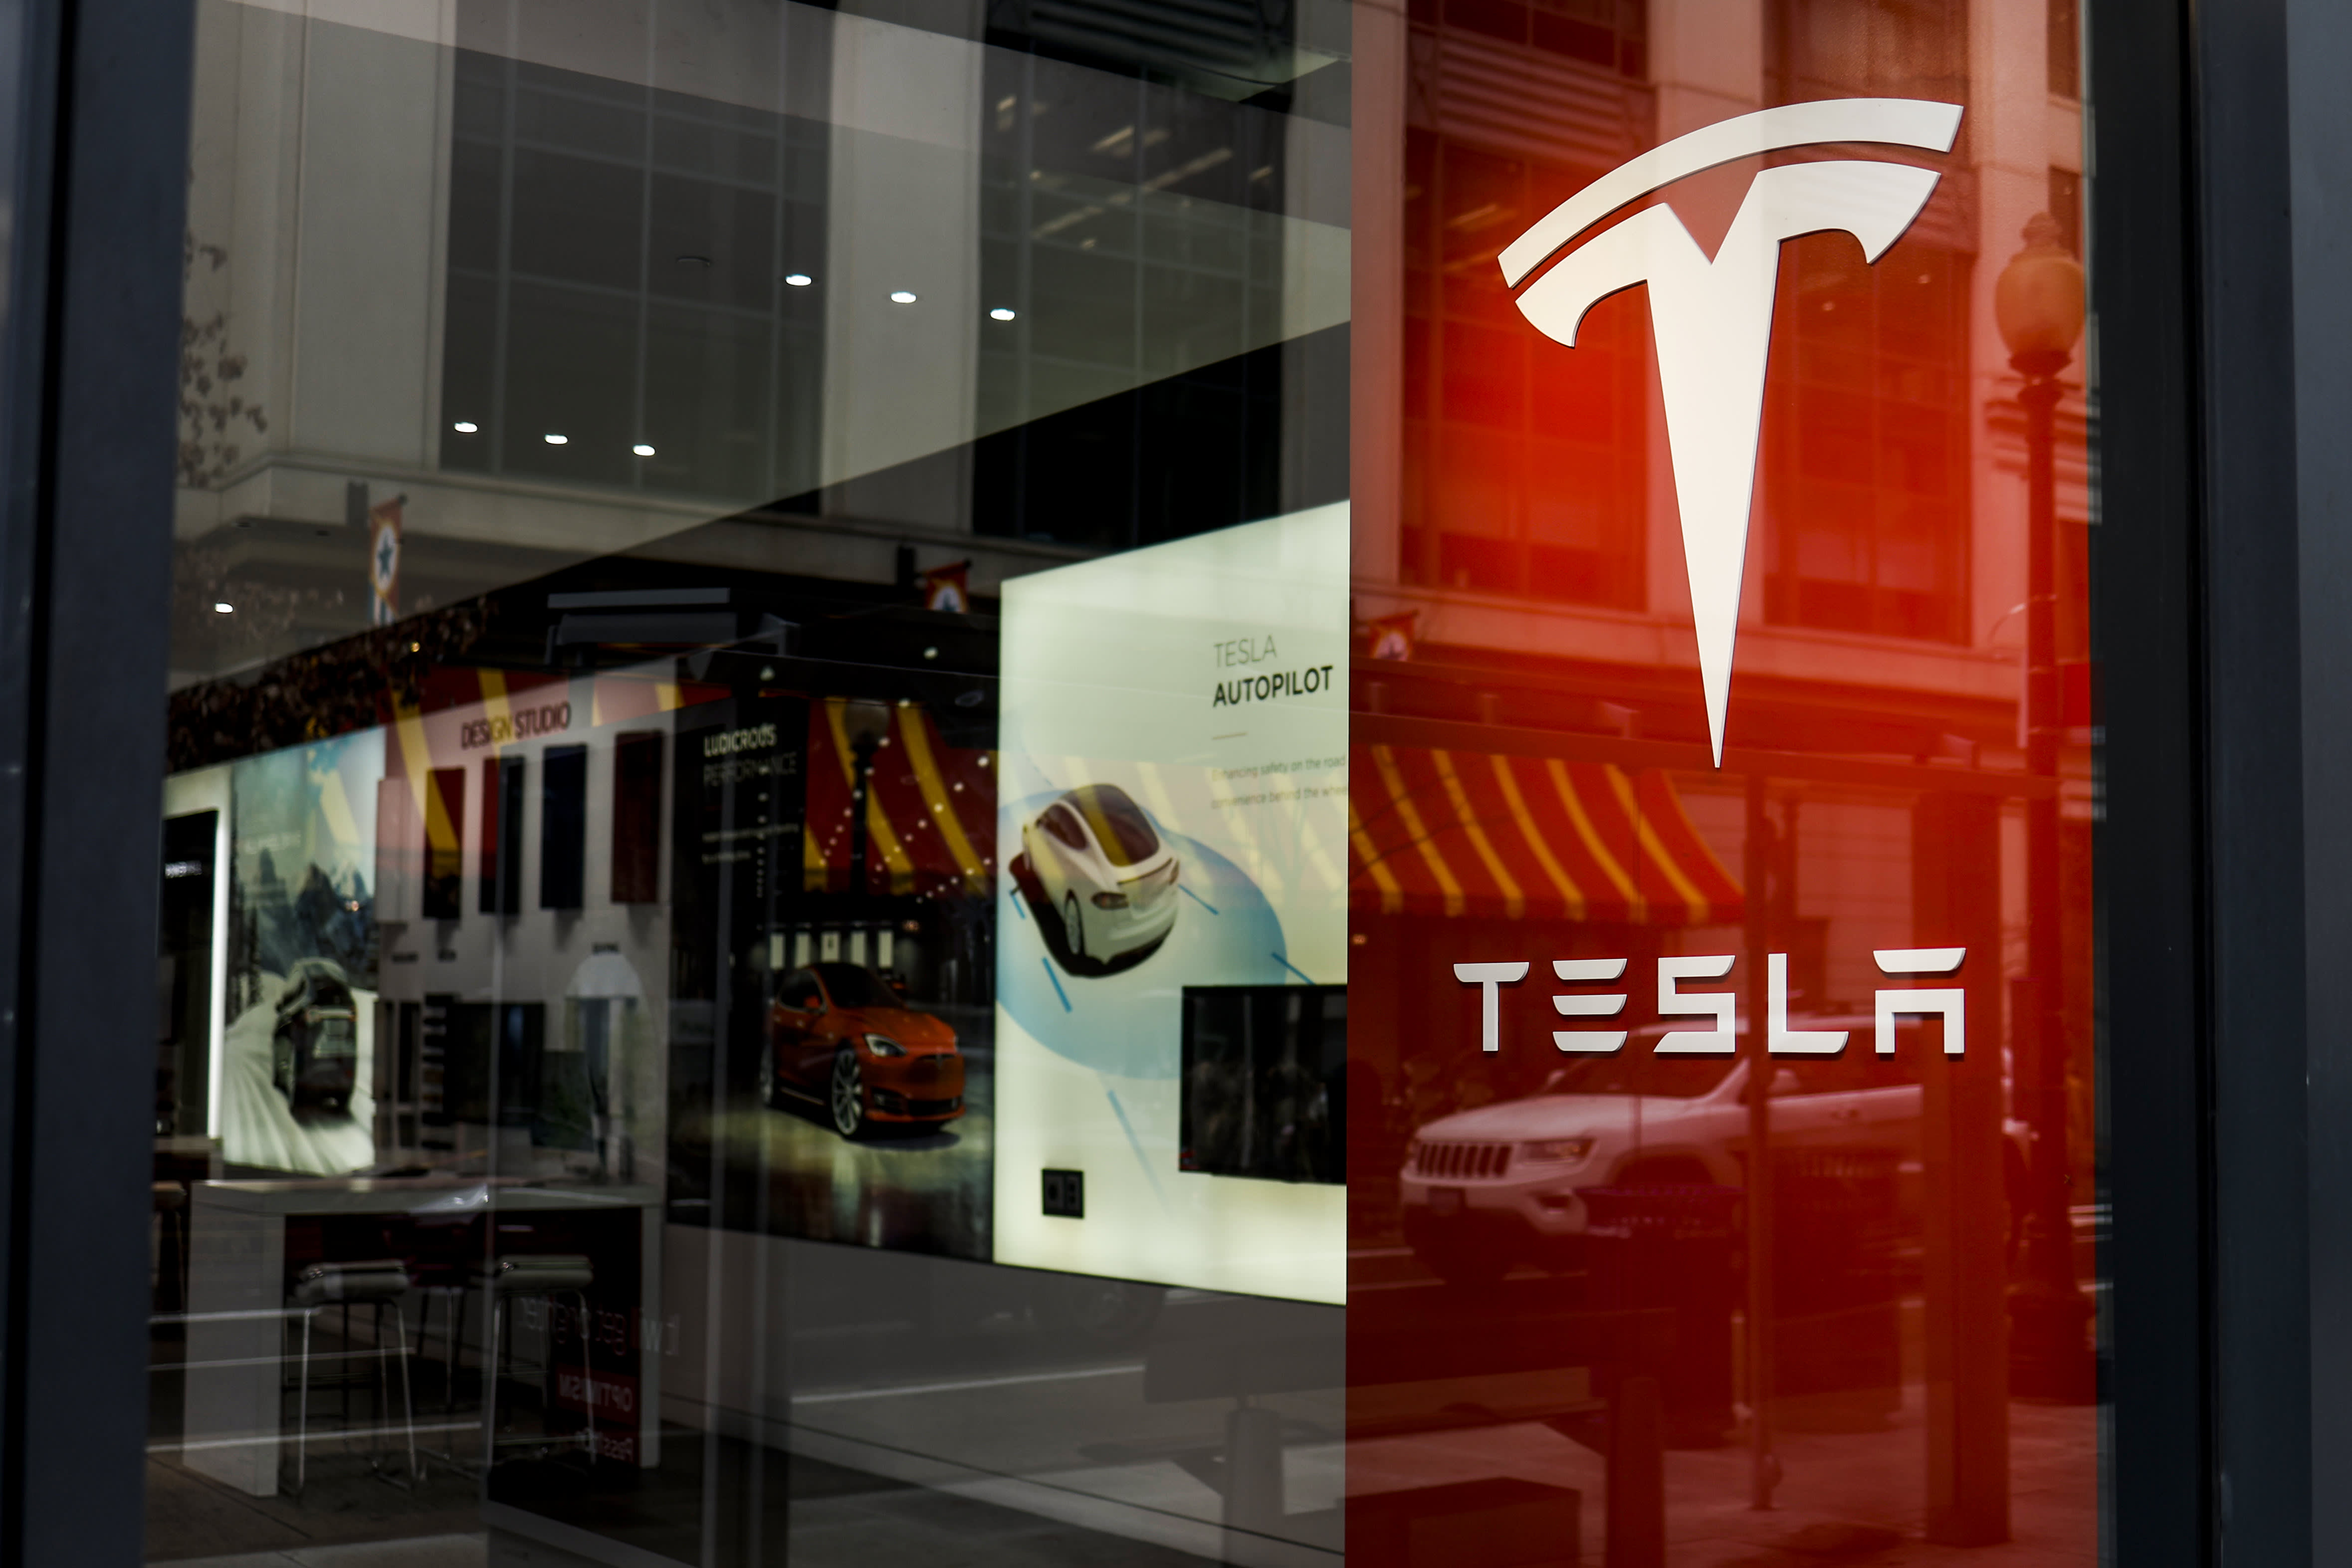 Why some Wall Street analysts think Tesla may have more price cuts ahead